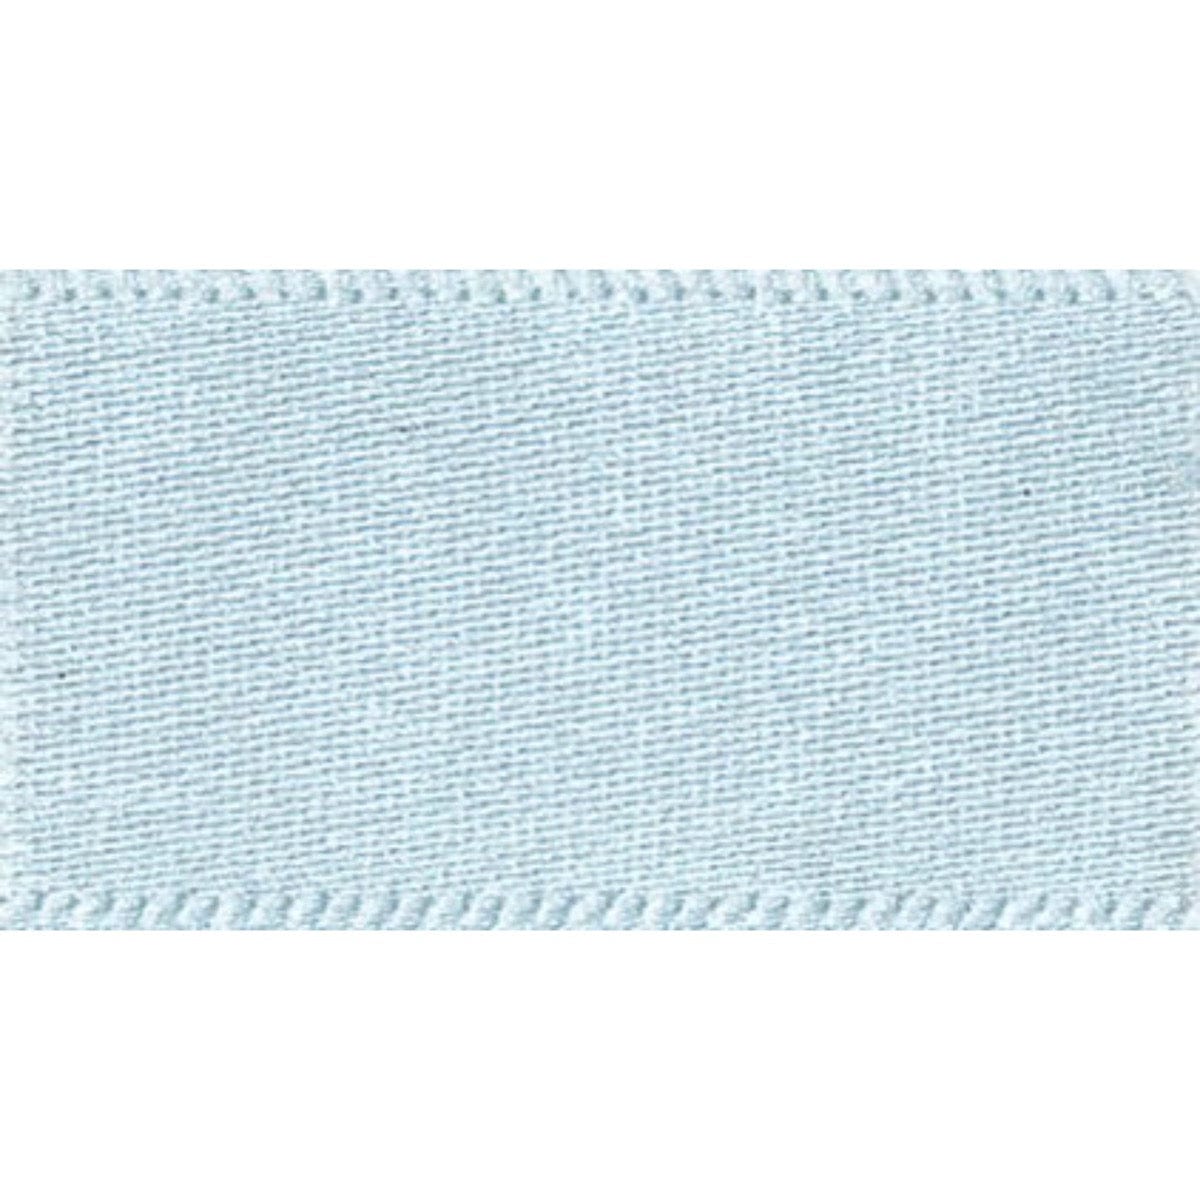 Double Faced Satin Ribbon Sky Blue: 3mm wide. Price per metre.